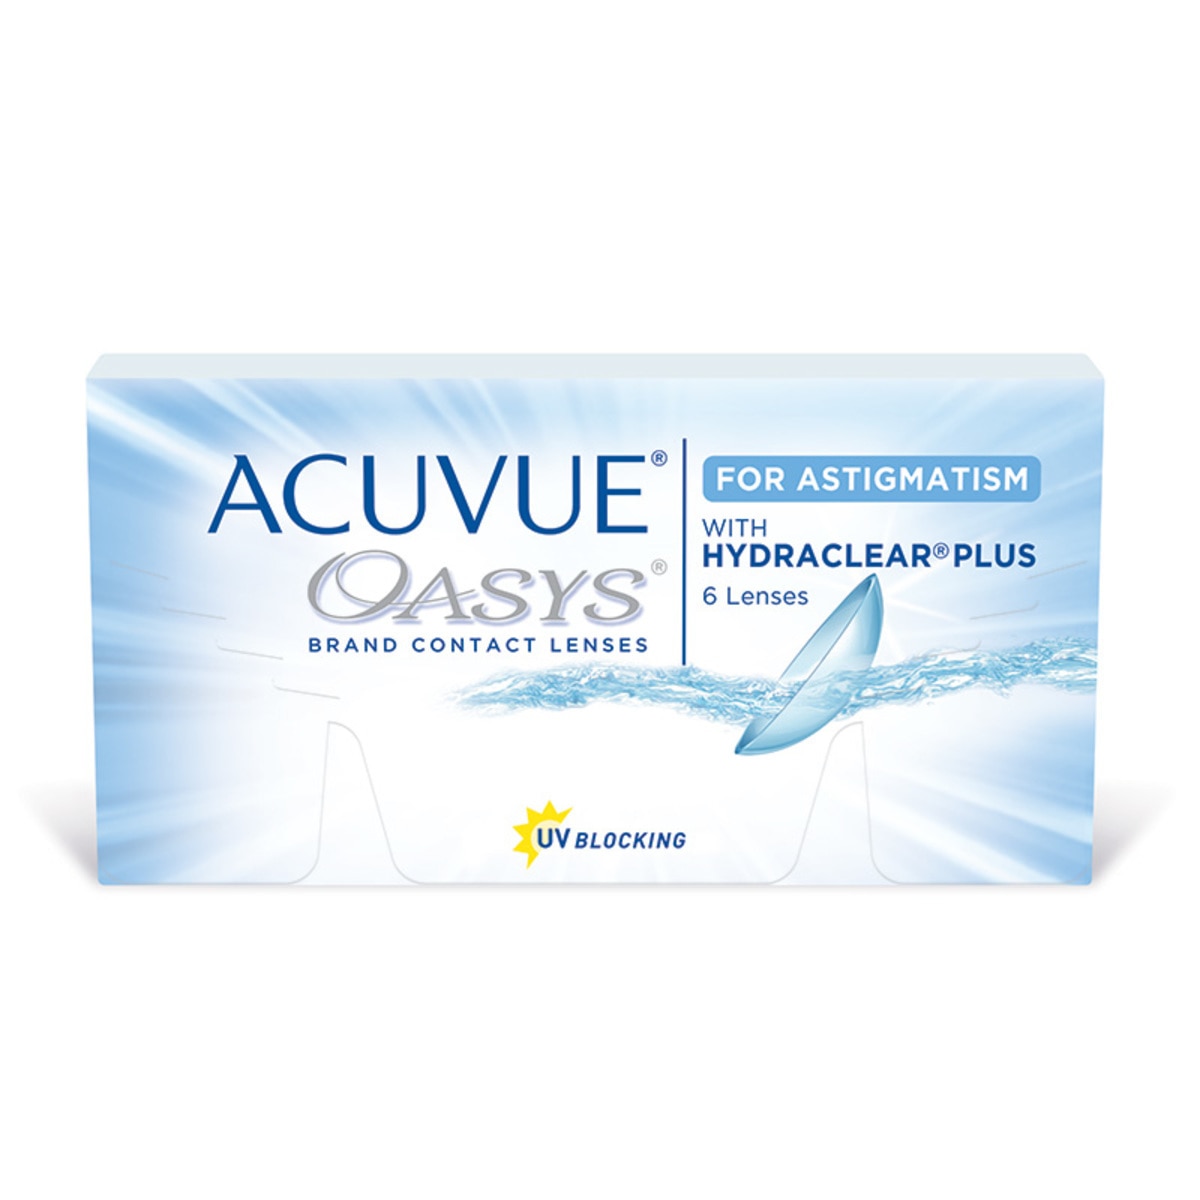 ACUVUE OASYS® con HYDRACLEAR Plus® para Astigmatismo (D -4.25, Cyl/Axis -0.75/70)